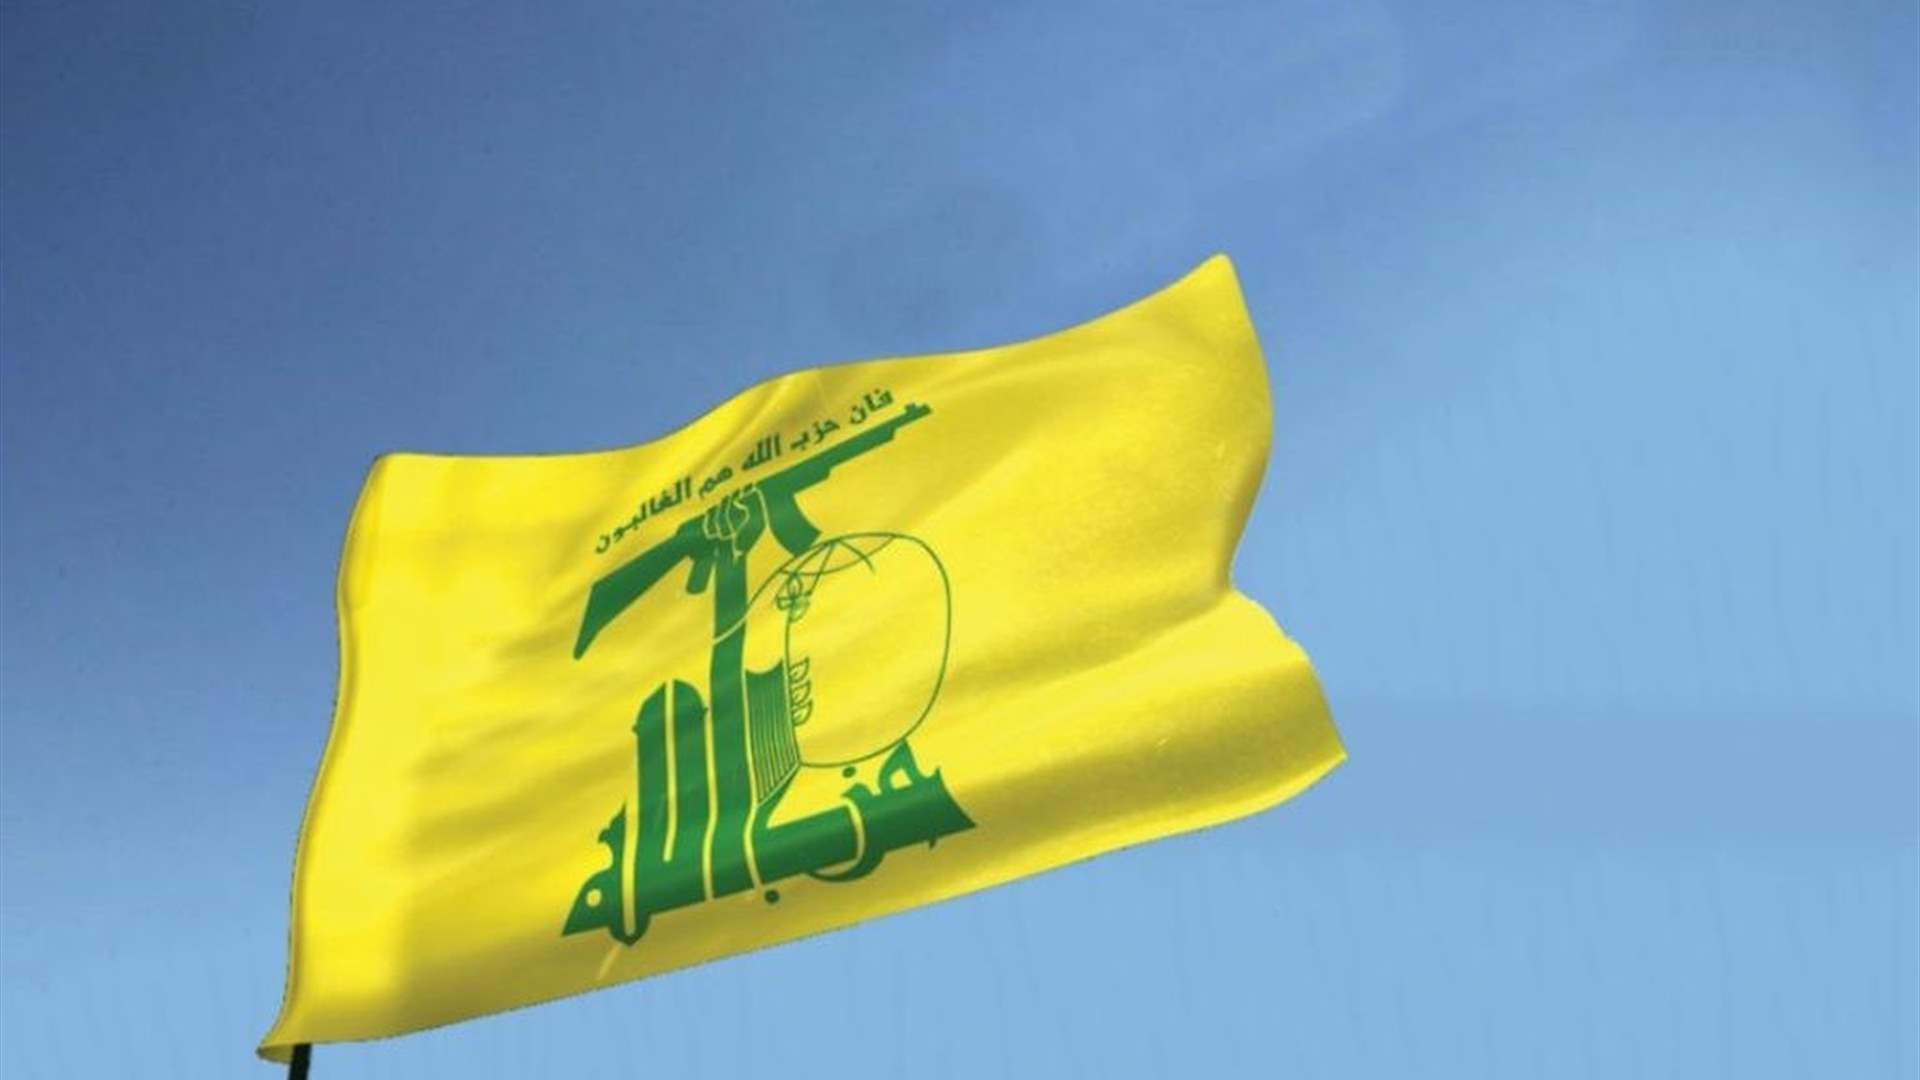 Hezbollah claims responsibility for suicidal drone attack in Metula